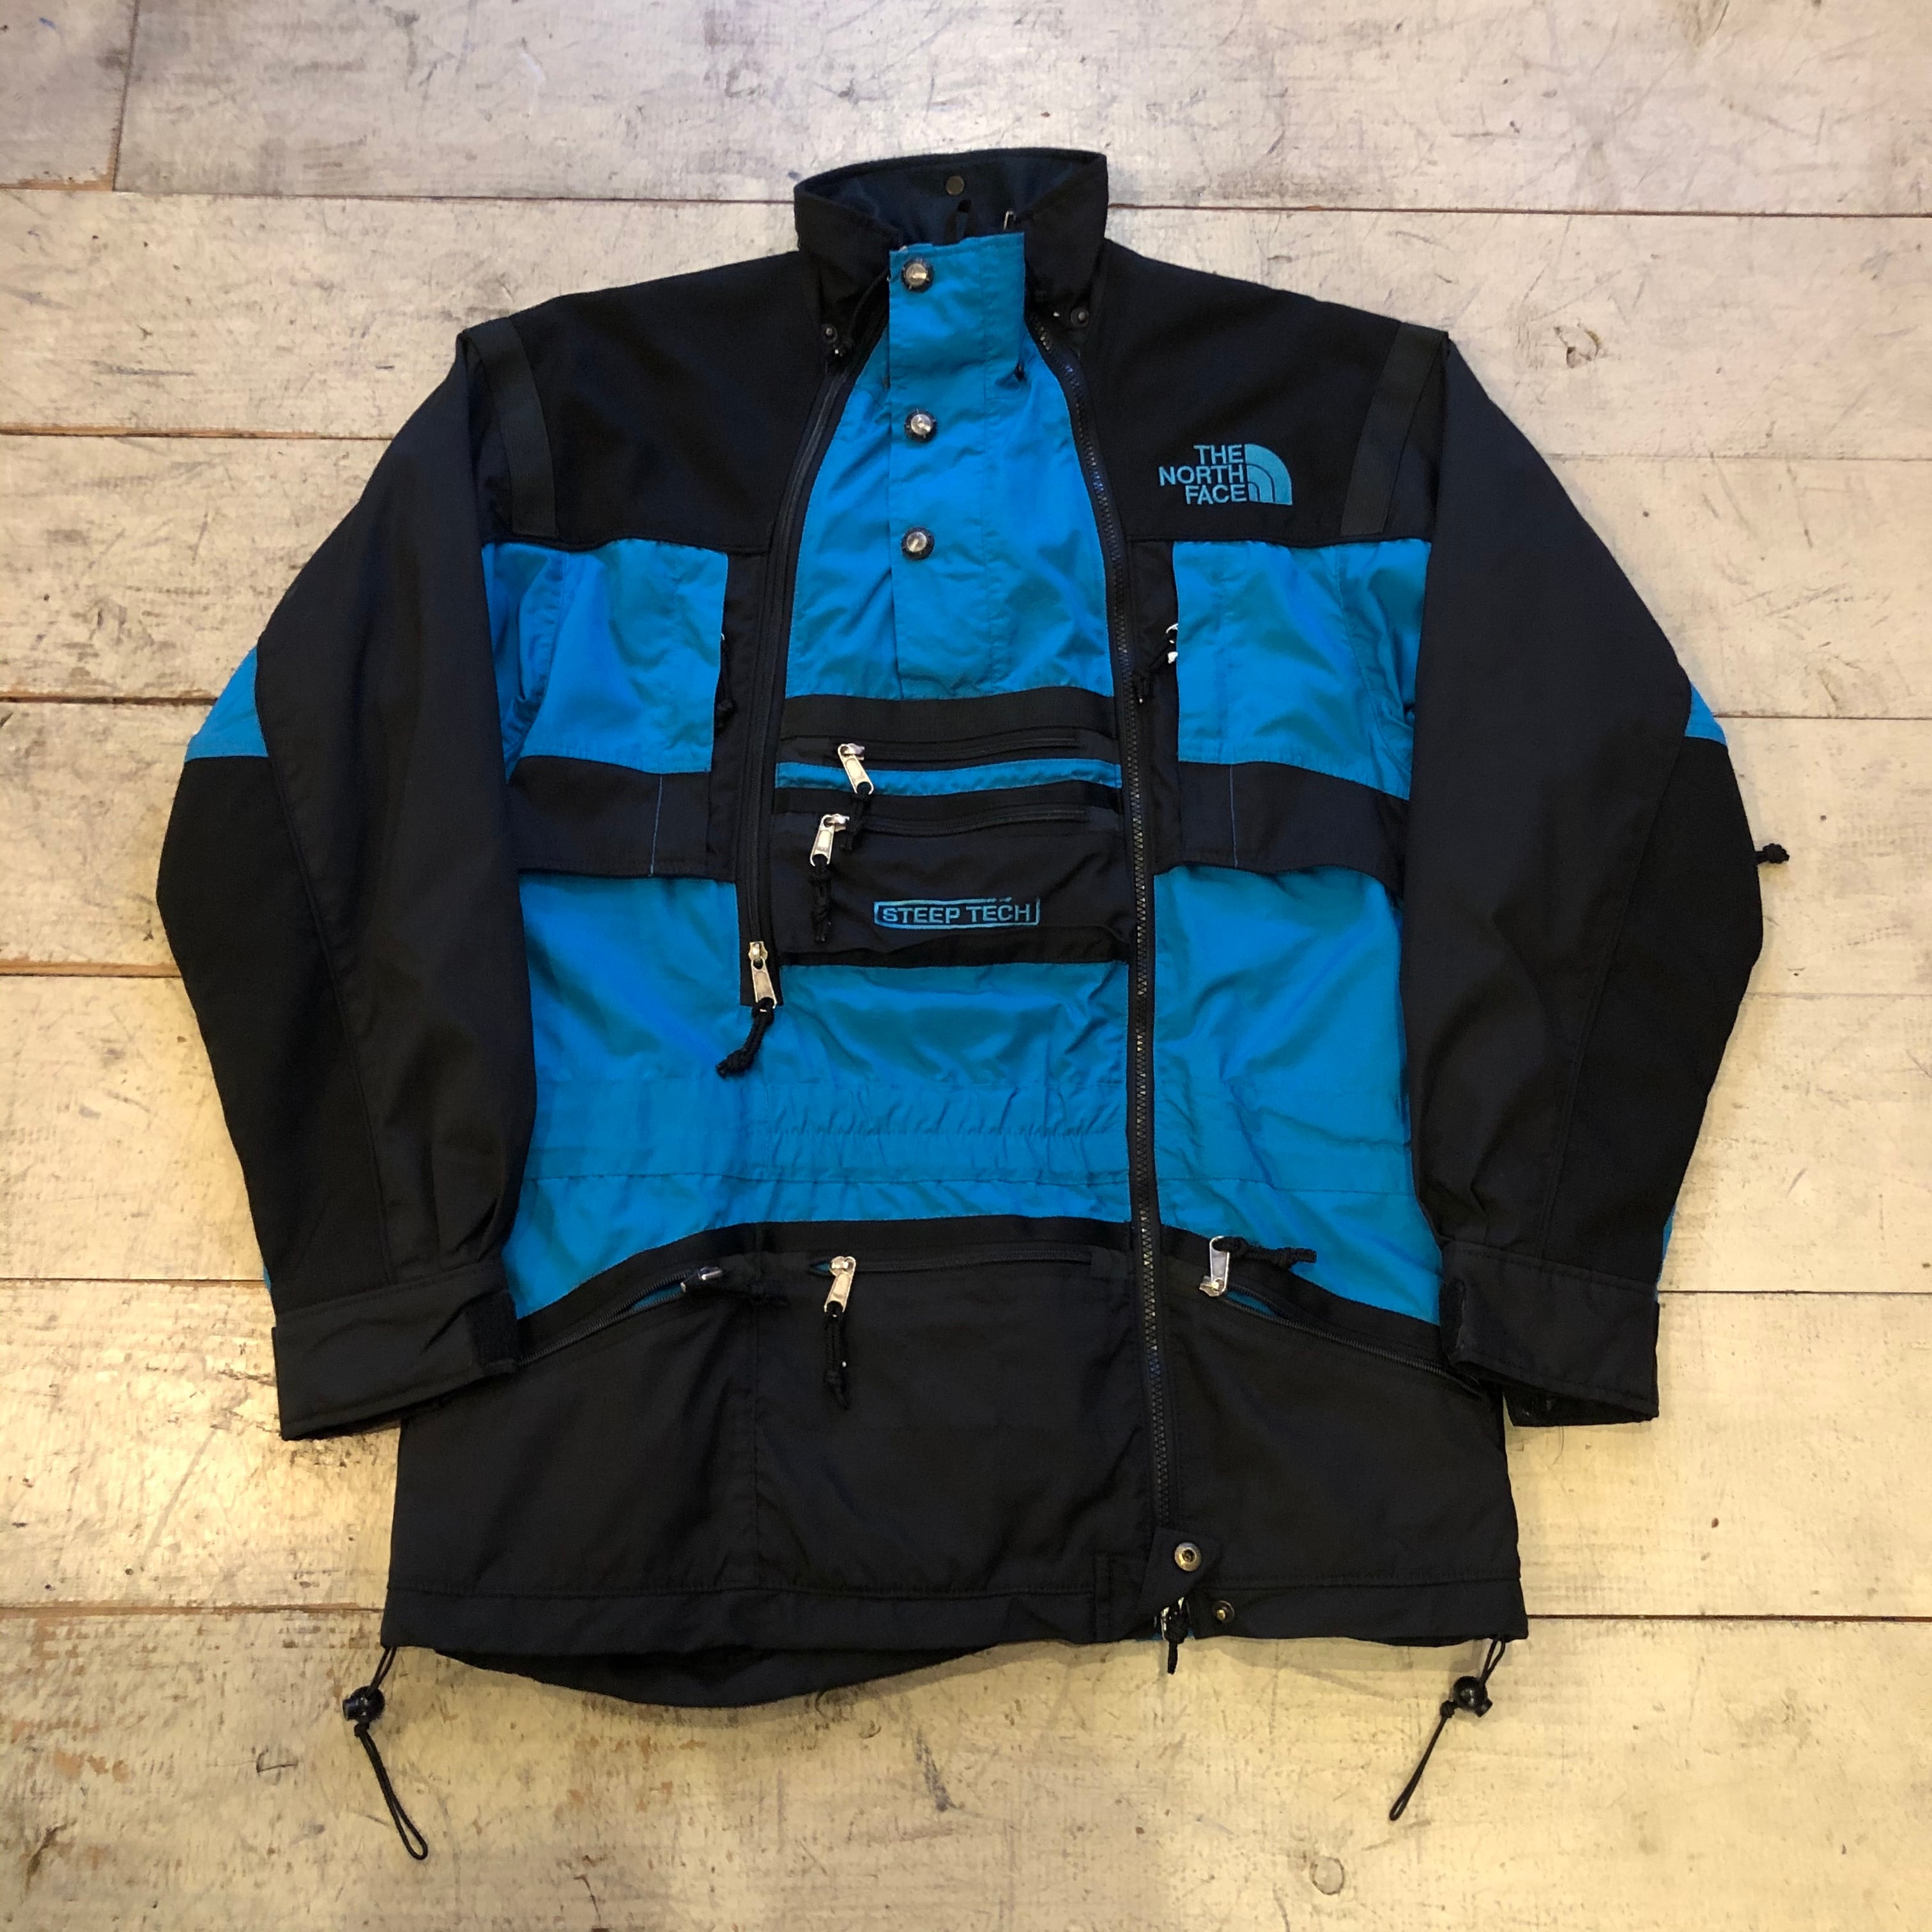 90s THE NORTH FACE 